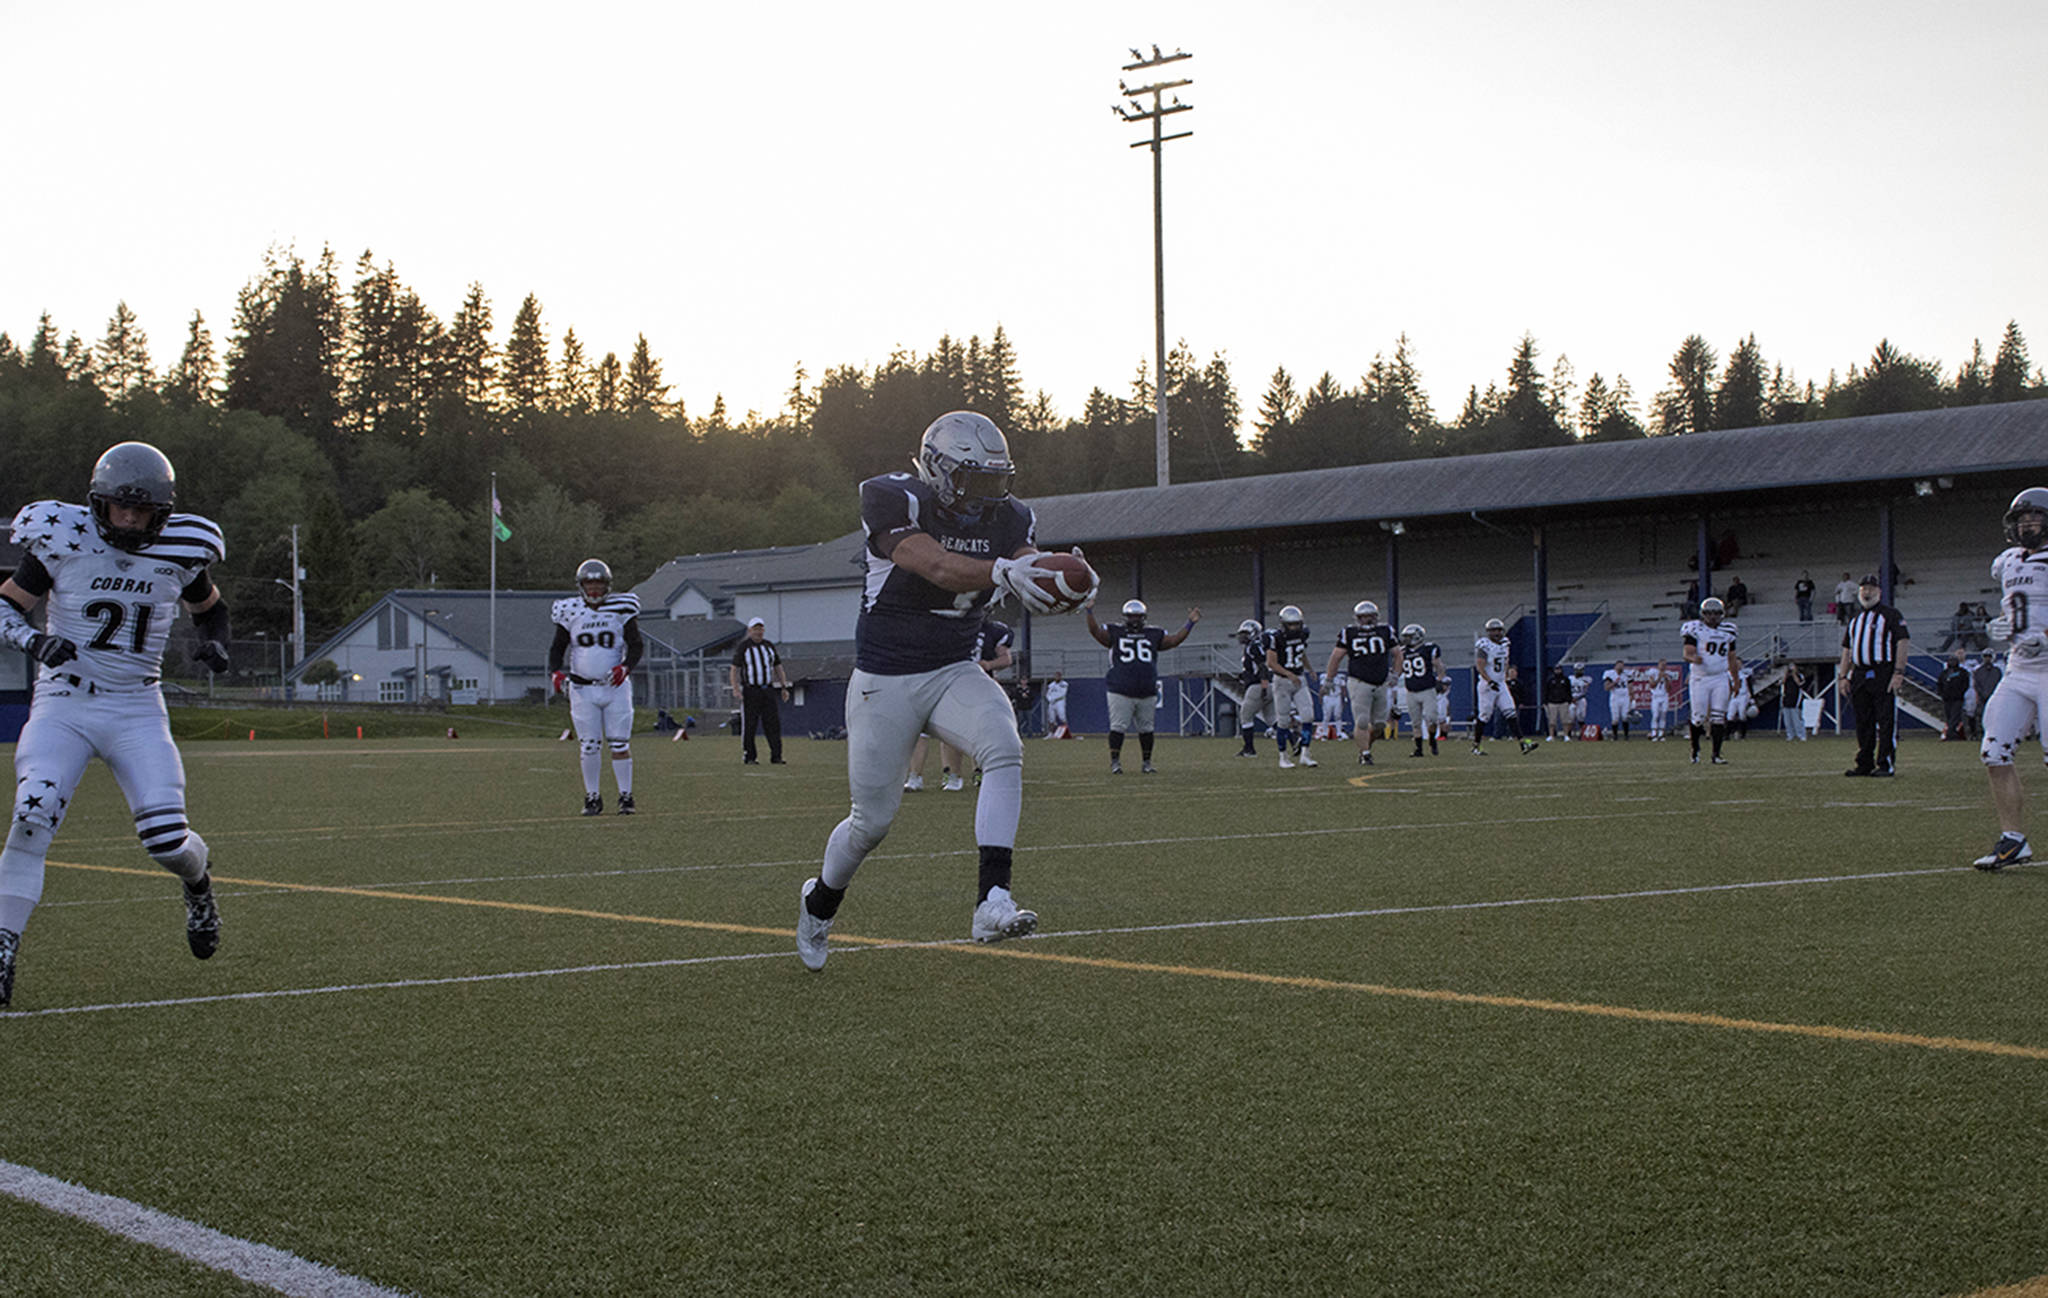 (Brendan Carl | The Daily World) Grays Harbor Bearcats’ Pedro Gonzalez runs into the end zone after catching a pass against the Cowlitz Cobras on Saturday.